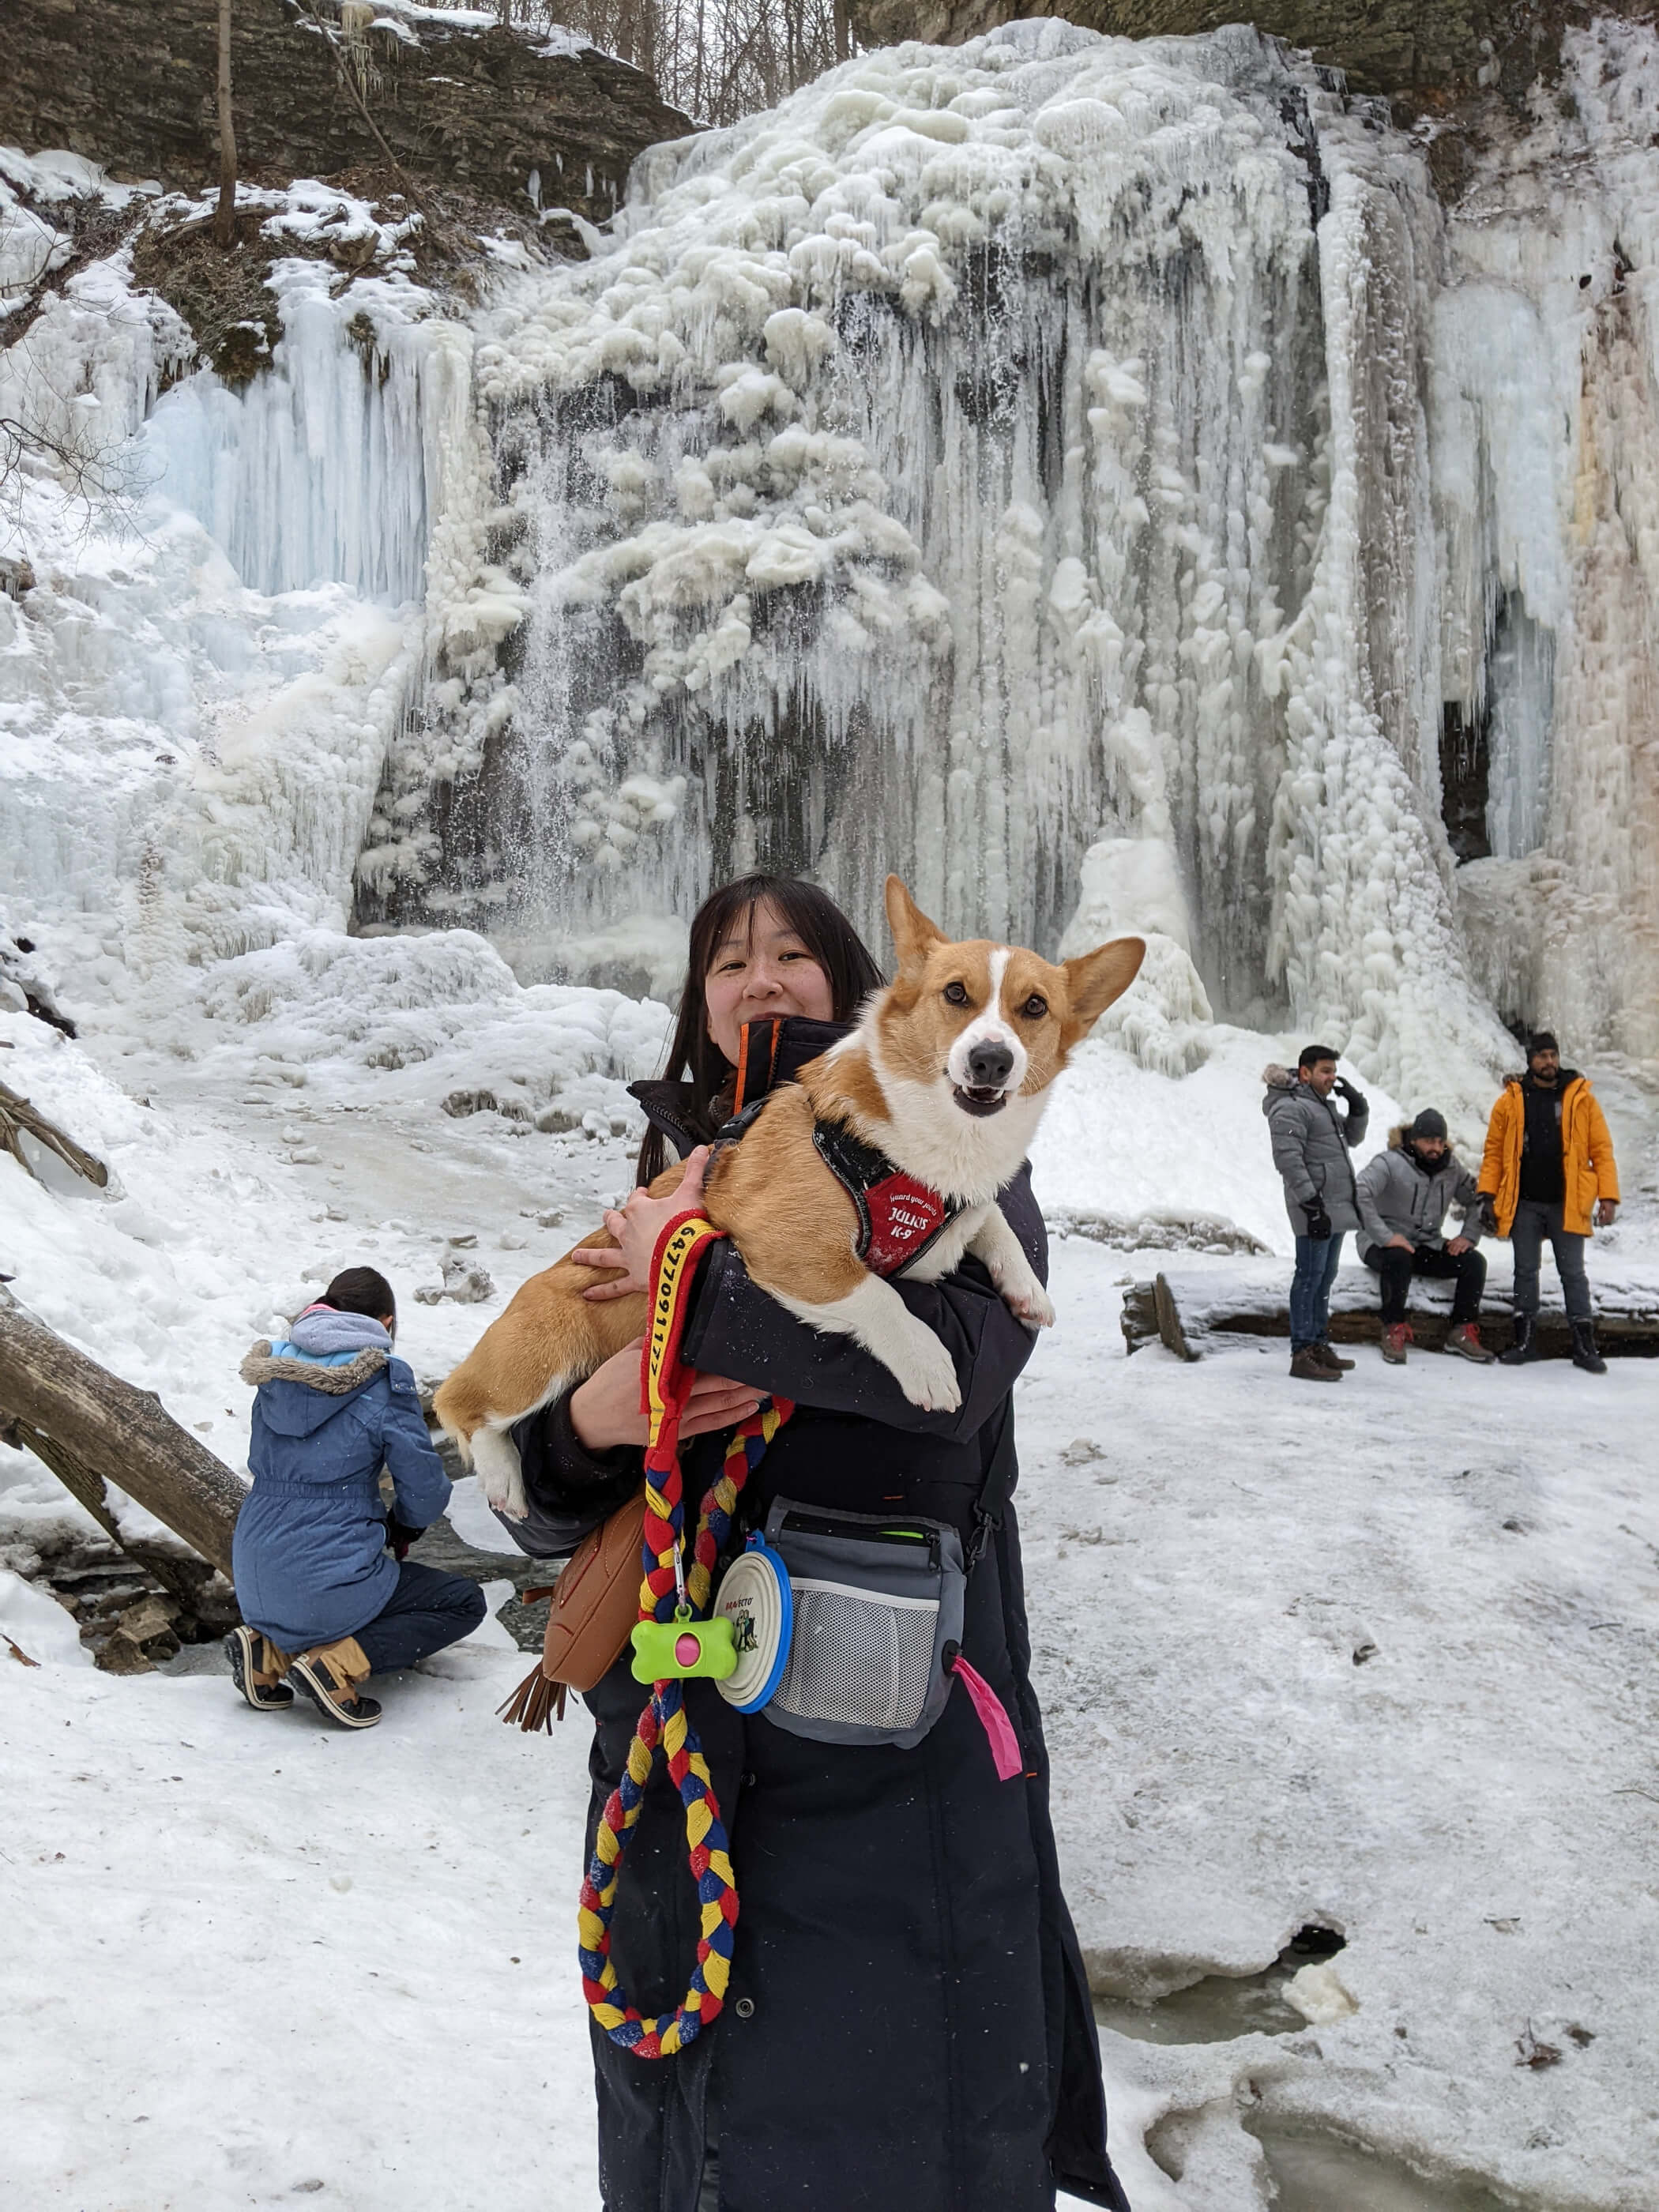 Limone, a red and white corgi wearing a Julius K-9 Harness is in Maria's arm posing by Tiffany Falls, a frozen waterfall in Hamilton. Limone is looking at the camera